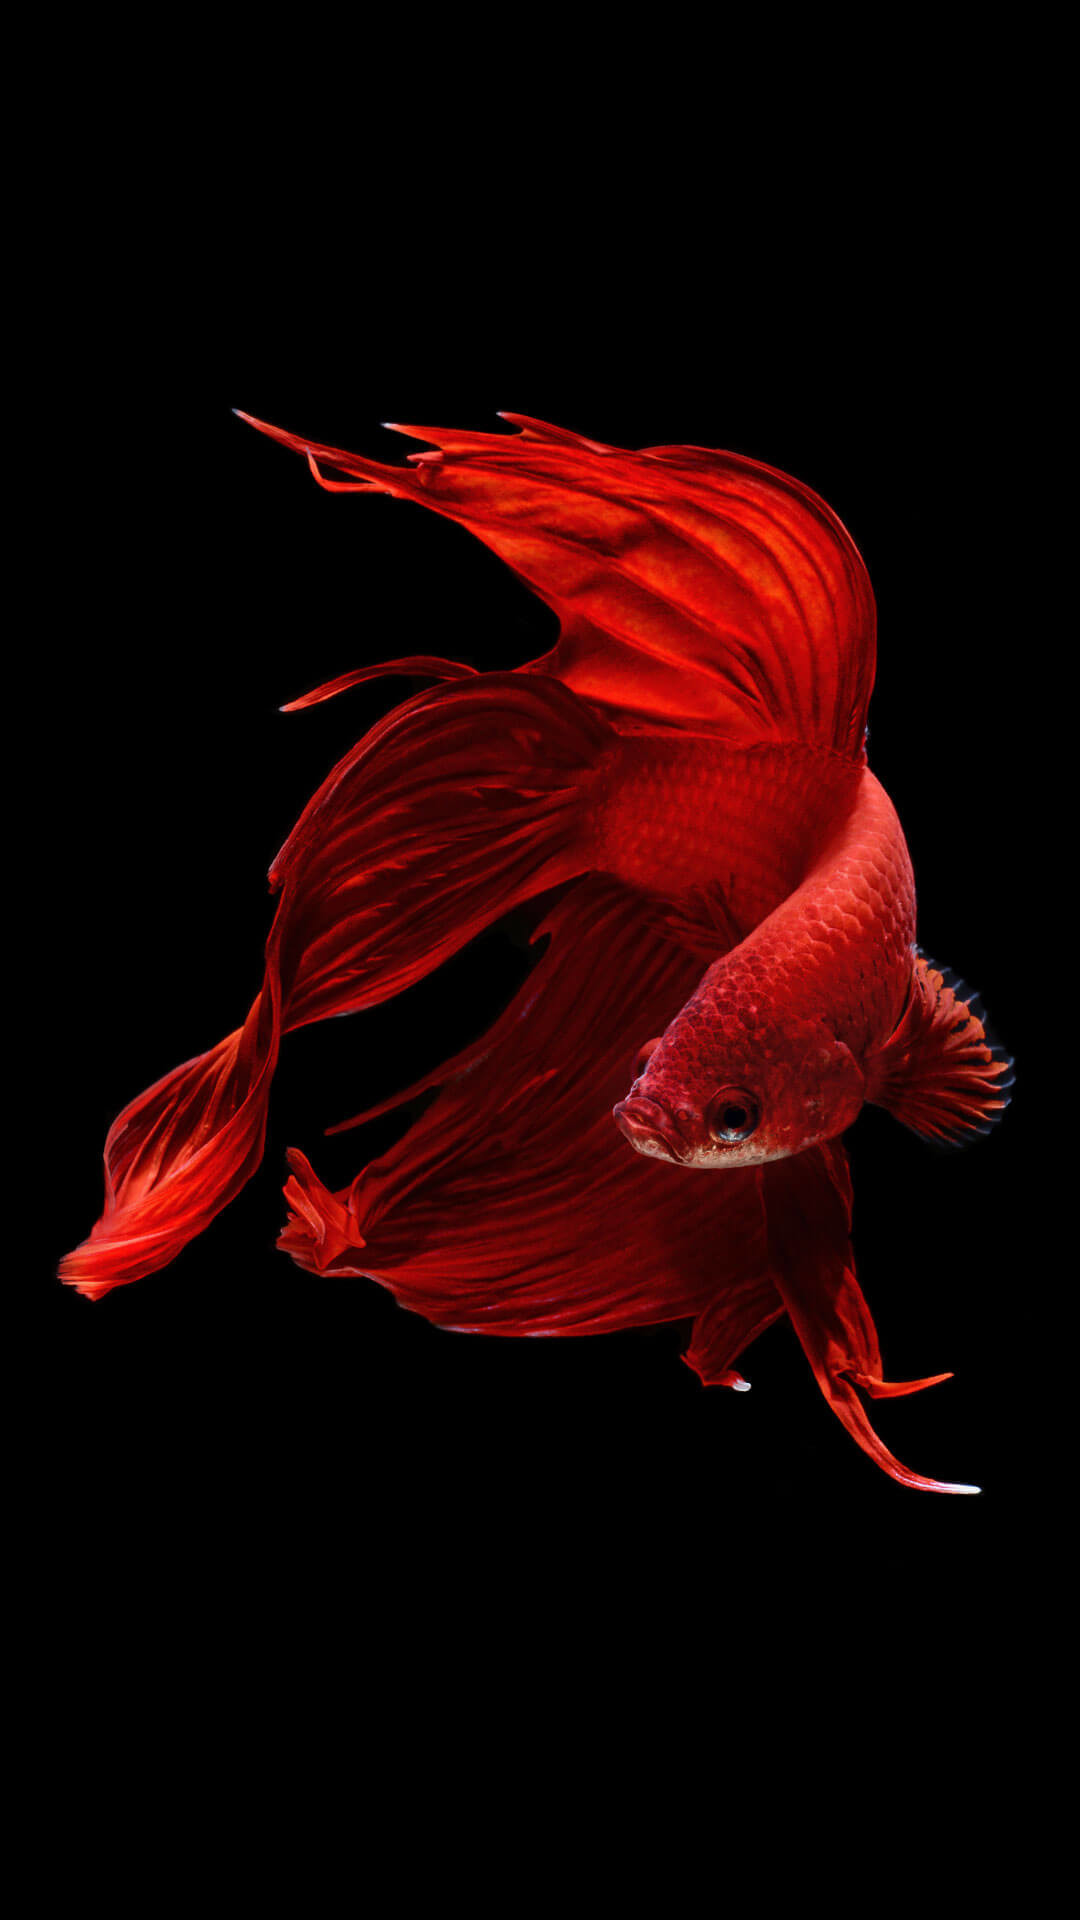 Betta Fish Iphone 6 And Iphone 6s Wallpaper Hd Data - Iphone Fish Wallpaper  Hd - 1080x1920 Wallpaper 